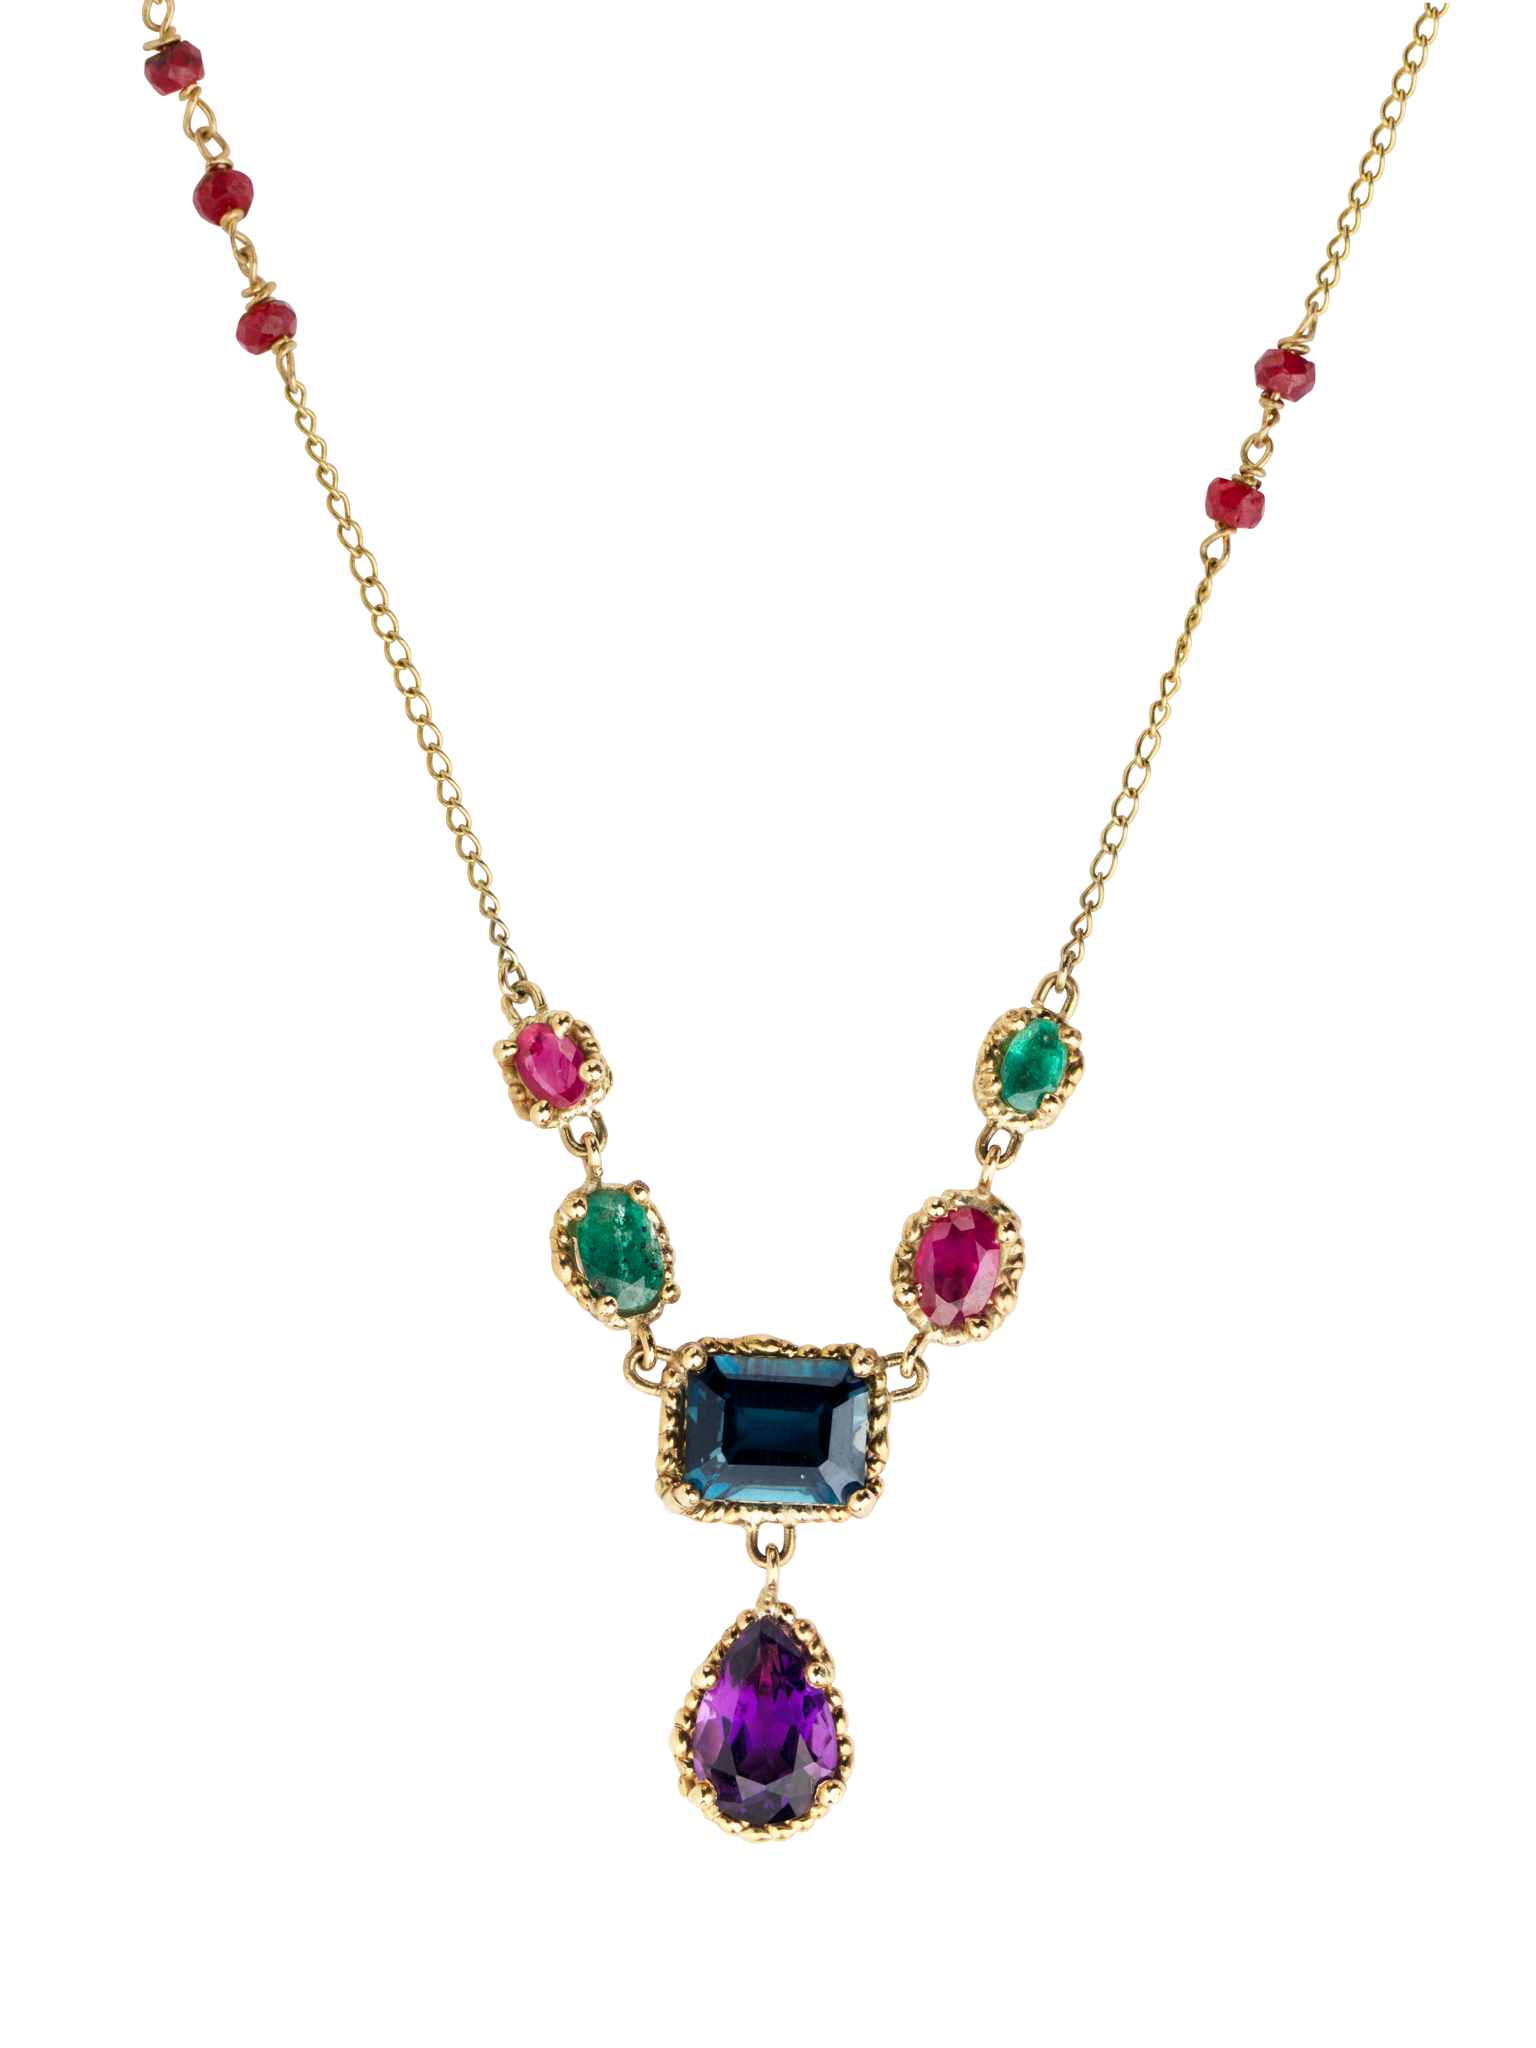 Blue, green & red chandelier necklace